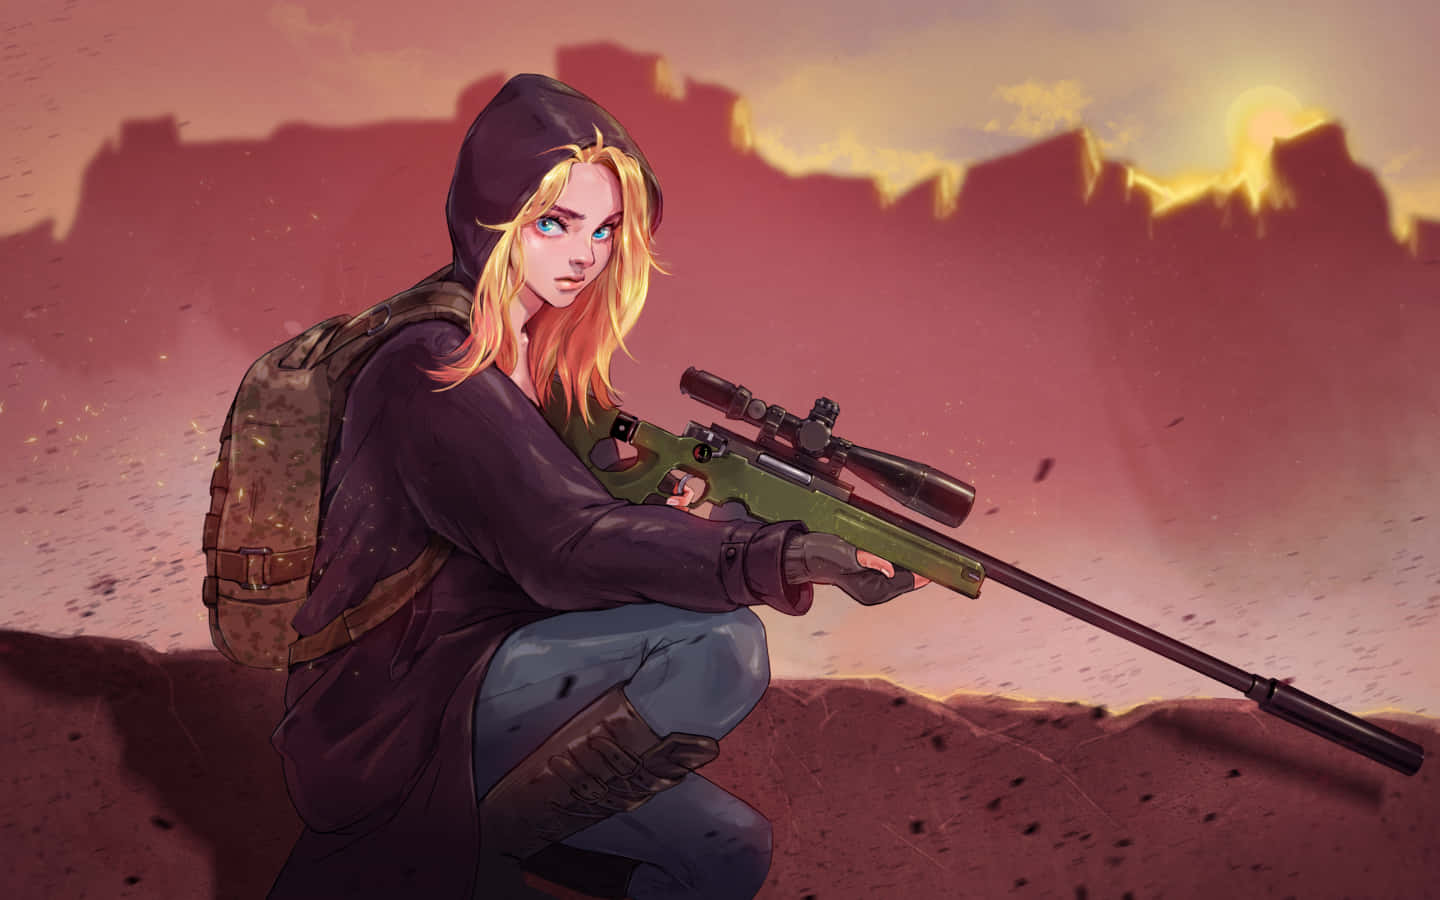 A Girl With A Rifle In Front Of A Mountain